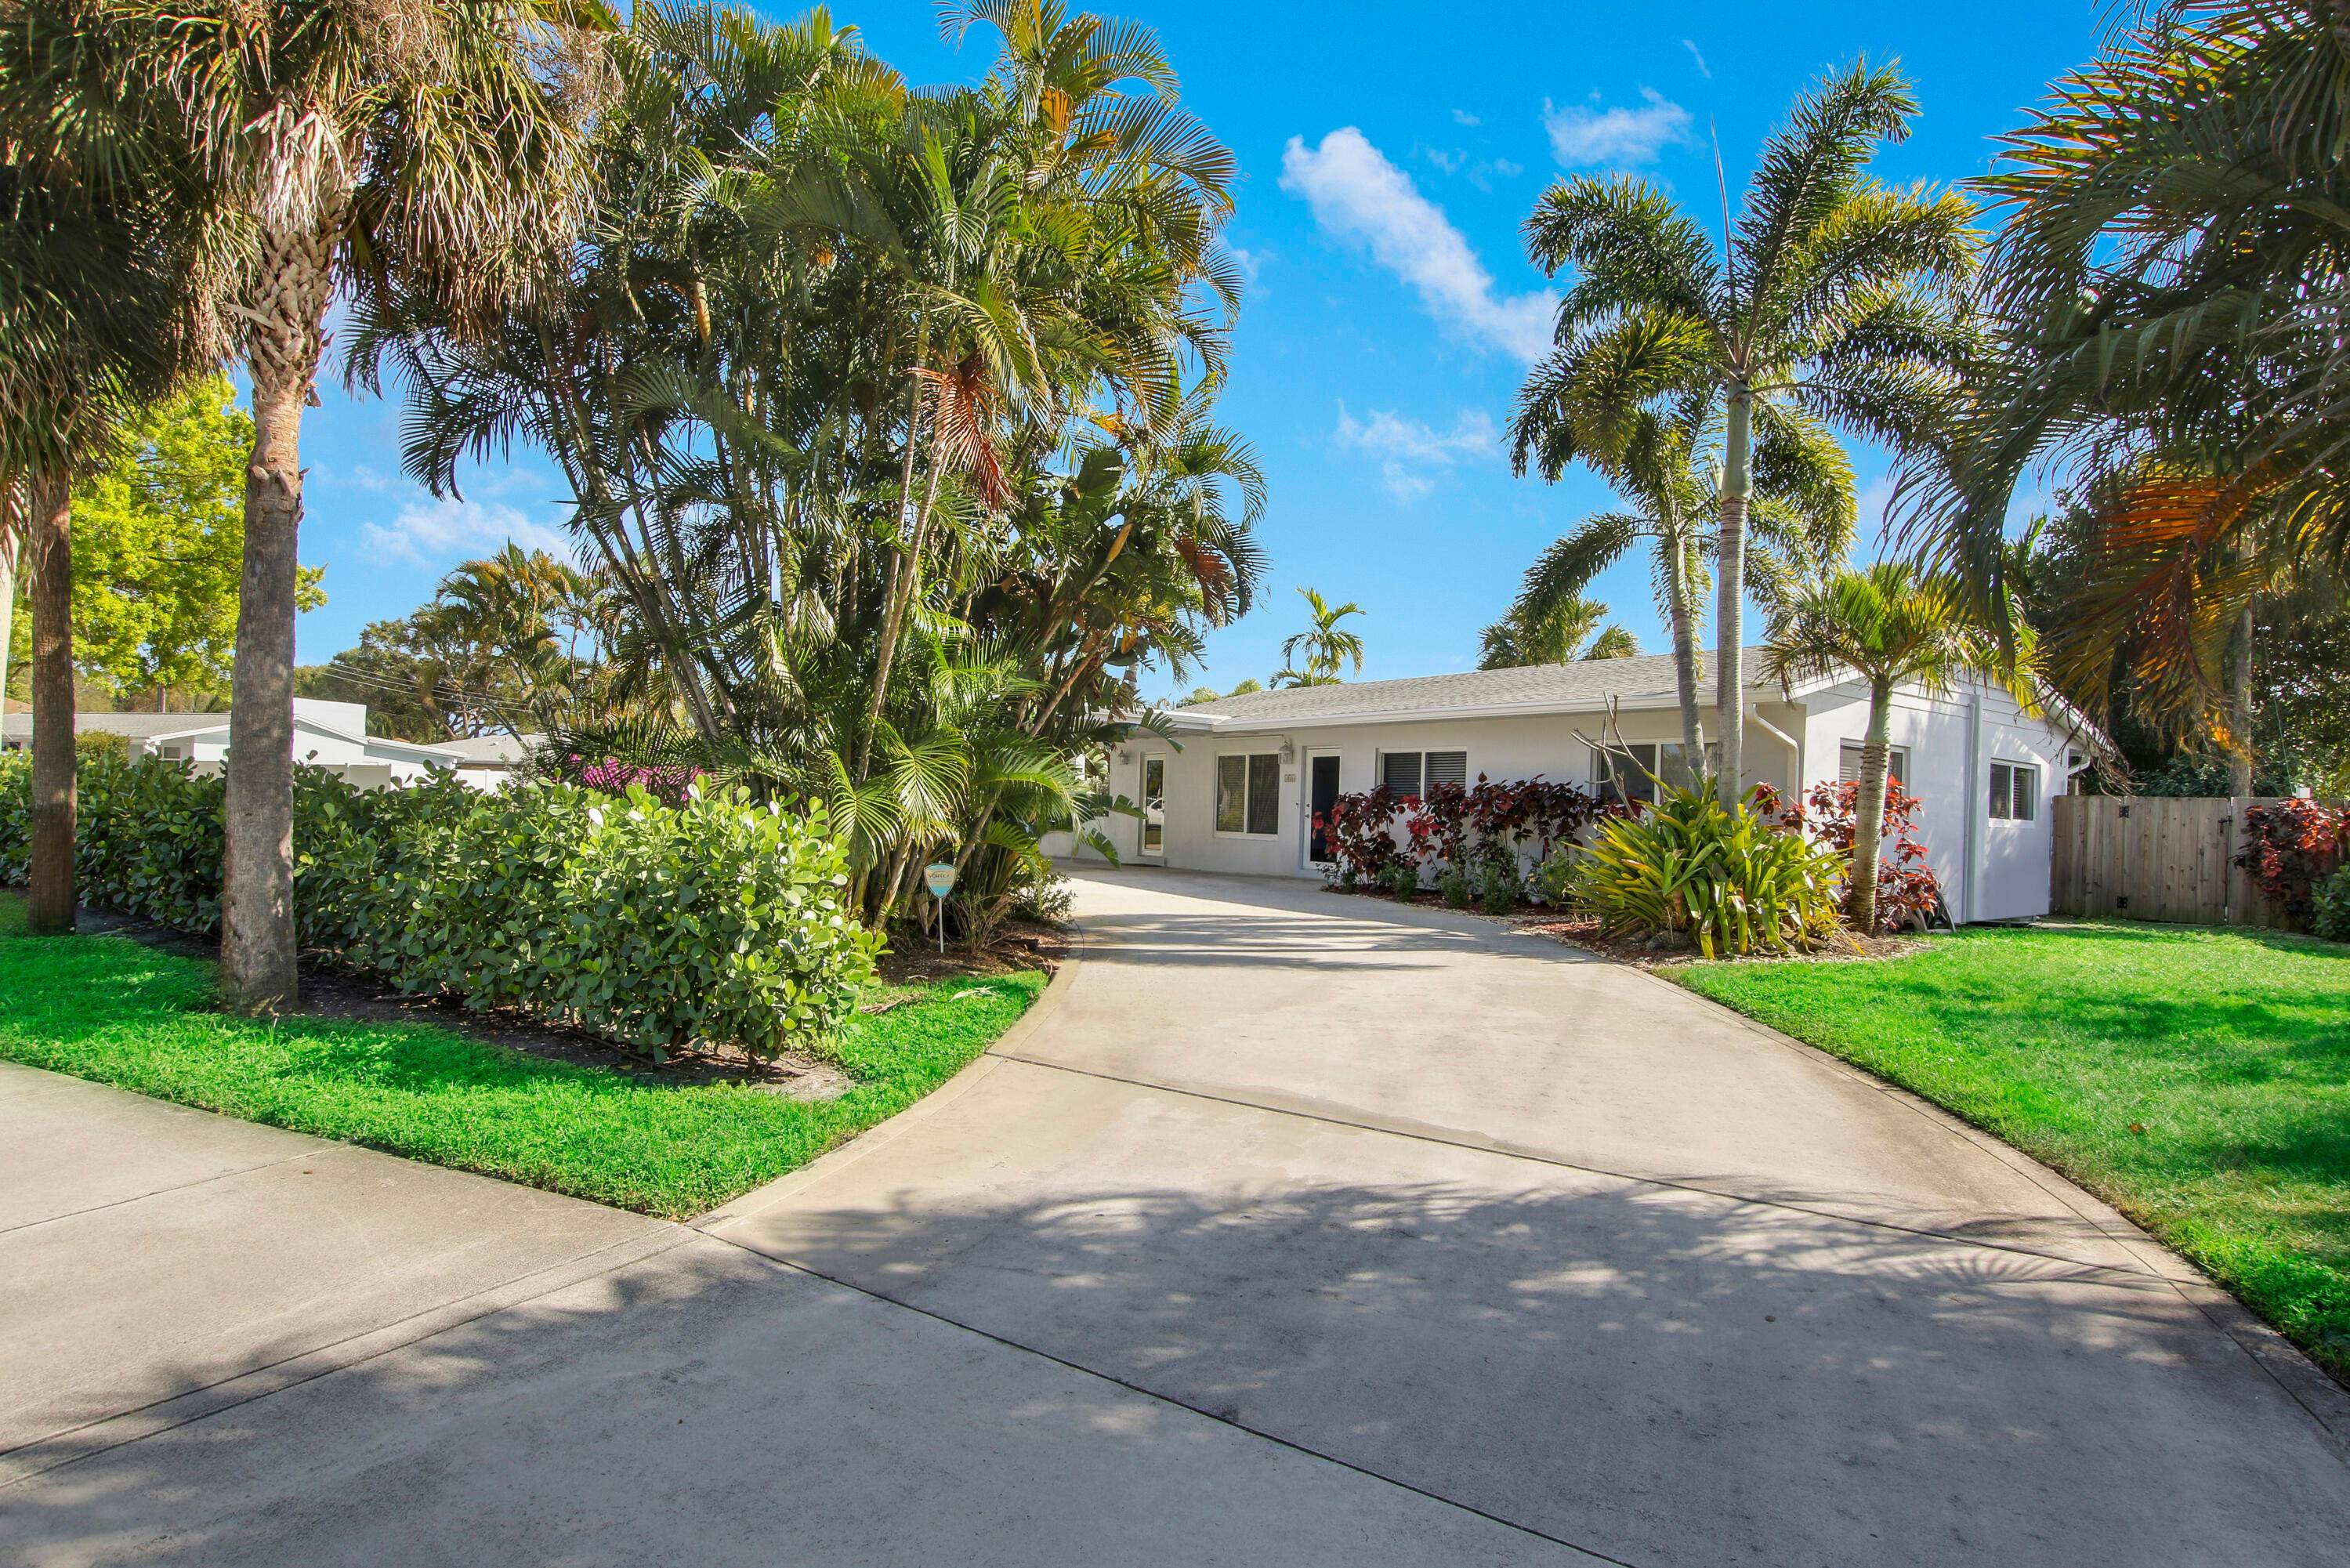 Come see this charming 3 bedroom, 2 bathroom single family home in the heart of Tequesta !